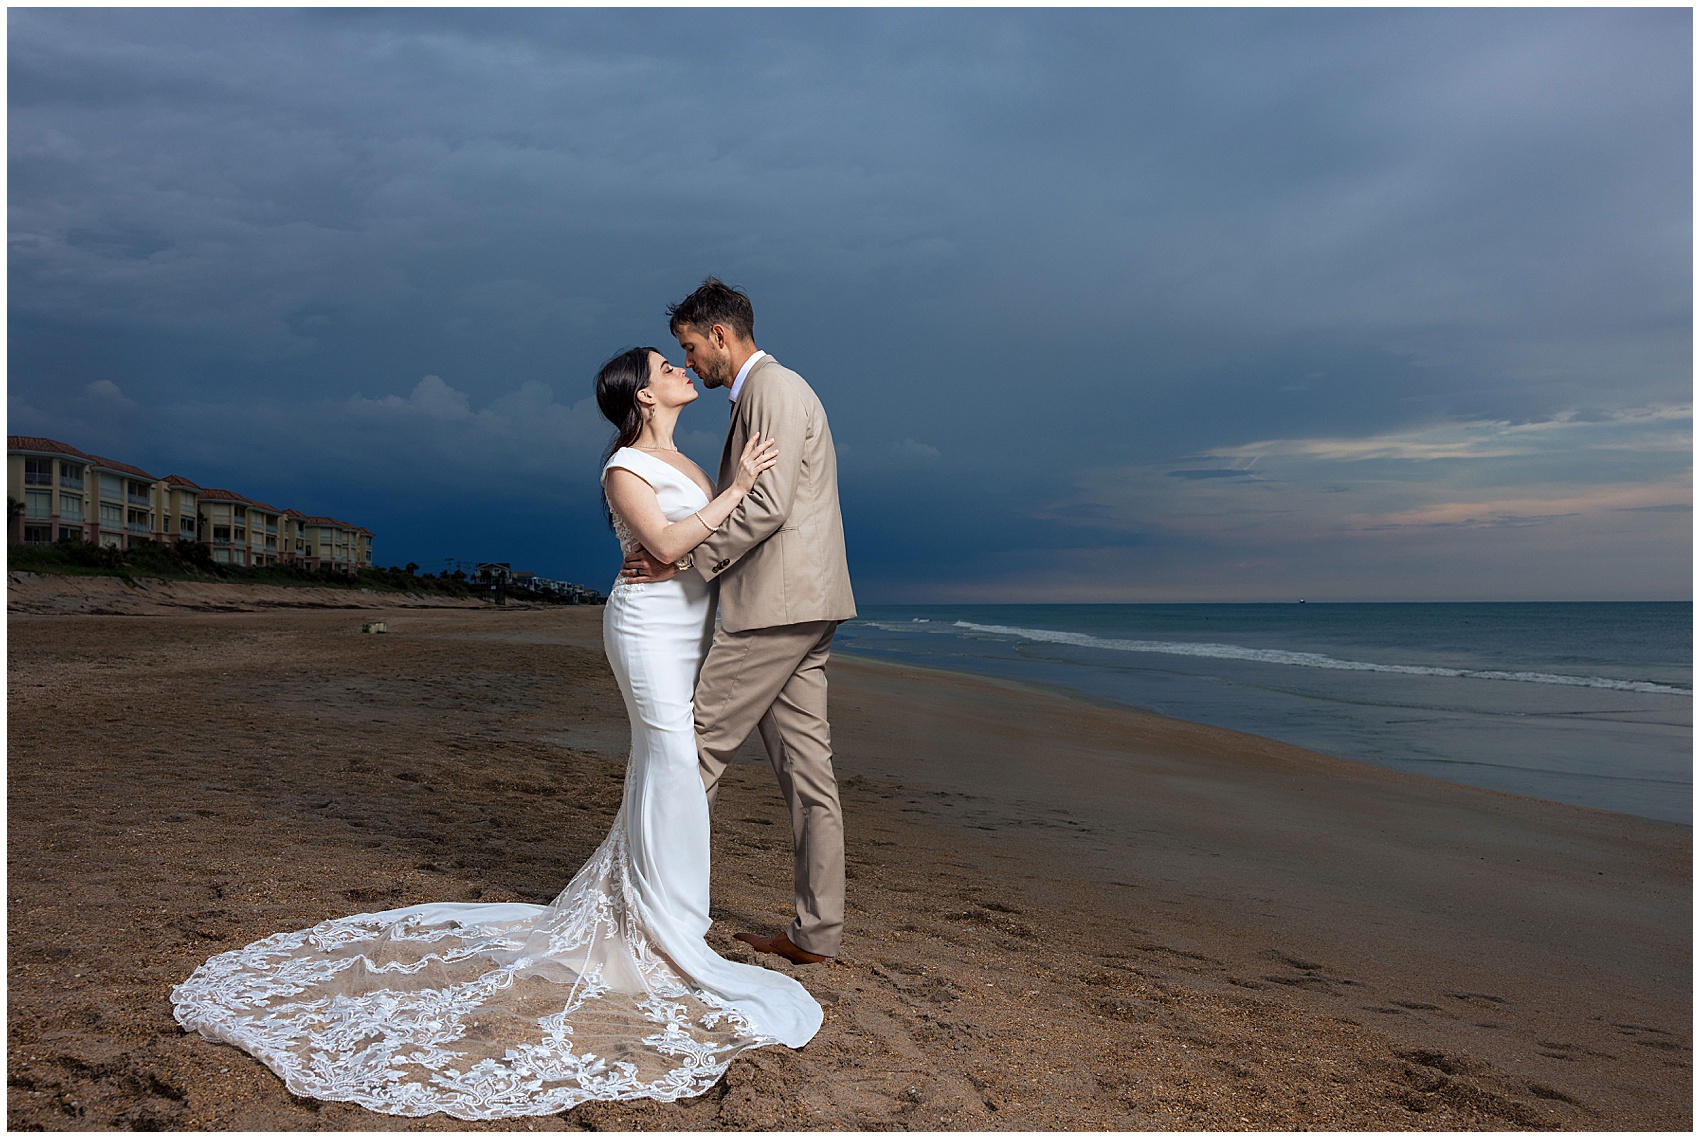 Newlyweds lean in for a kiss while standing on a beach at sunset during their serenata beach club wedding